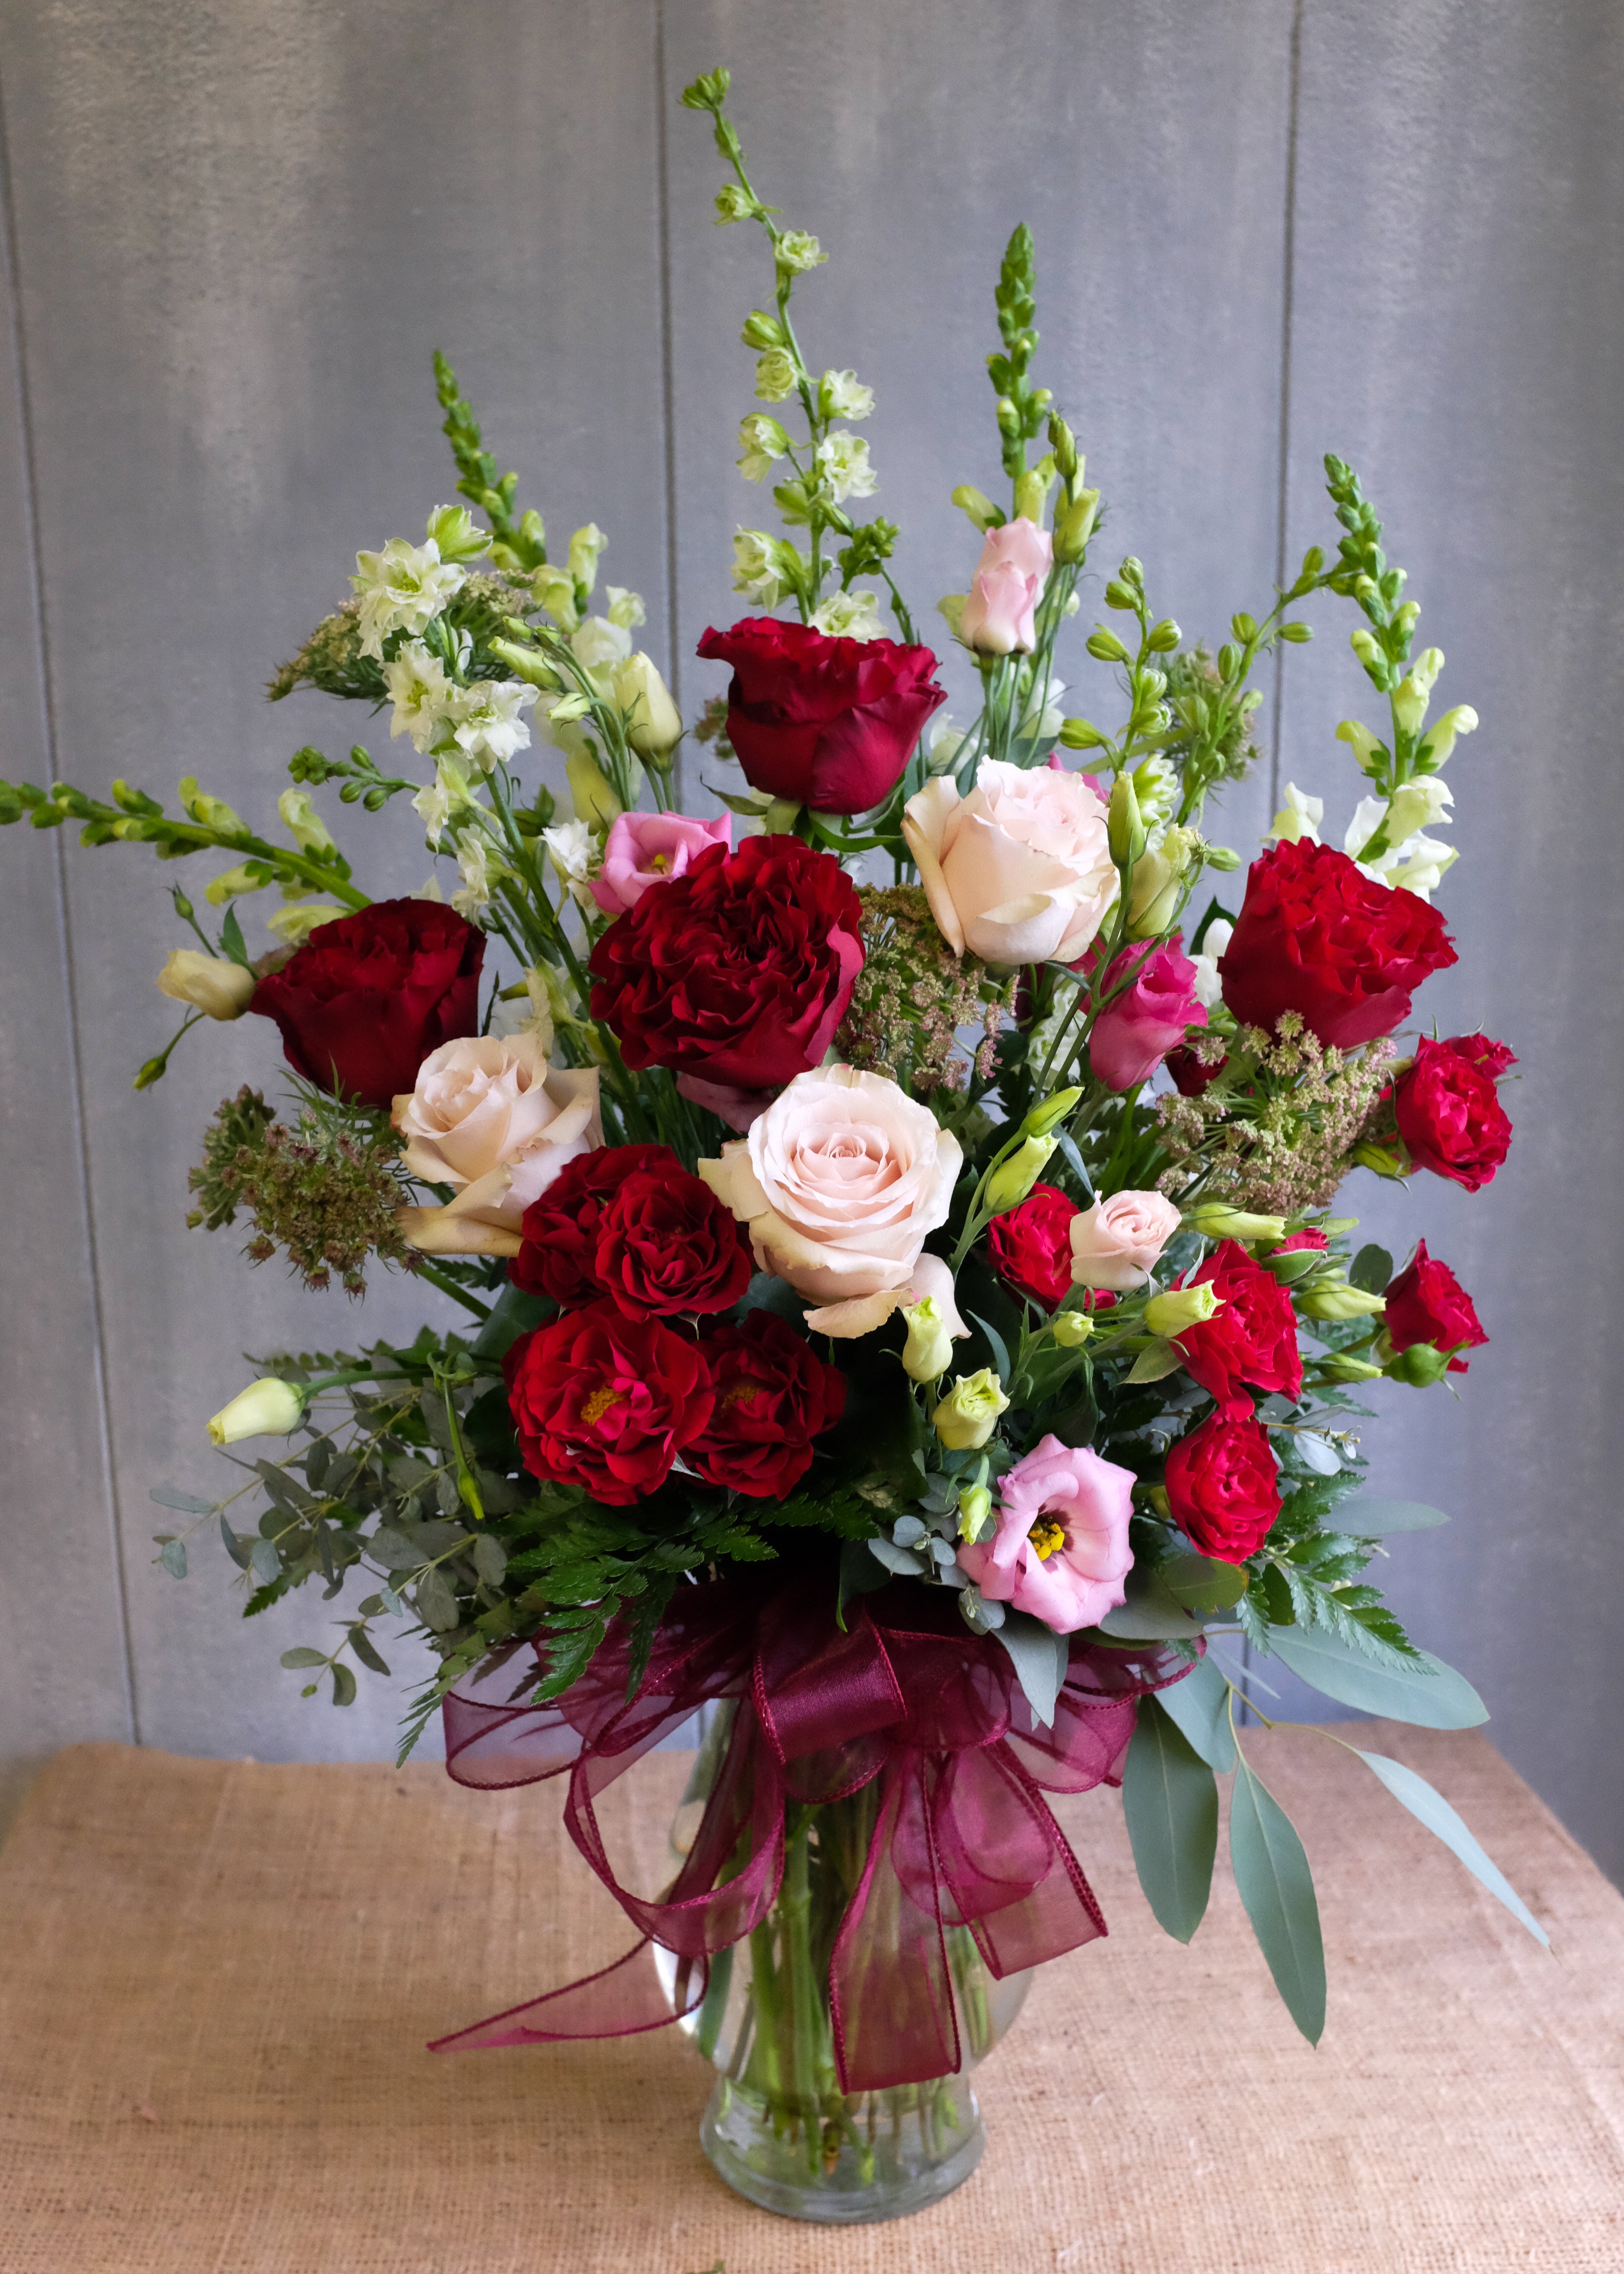 Virginia flower bouquet with red roses, pink lisianthus, and white snap dragons. Designed by Michler's Florist in 